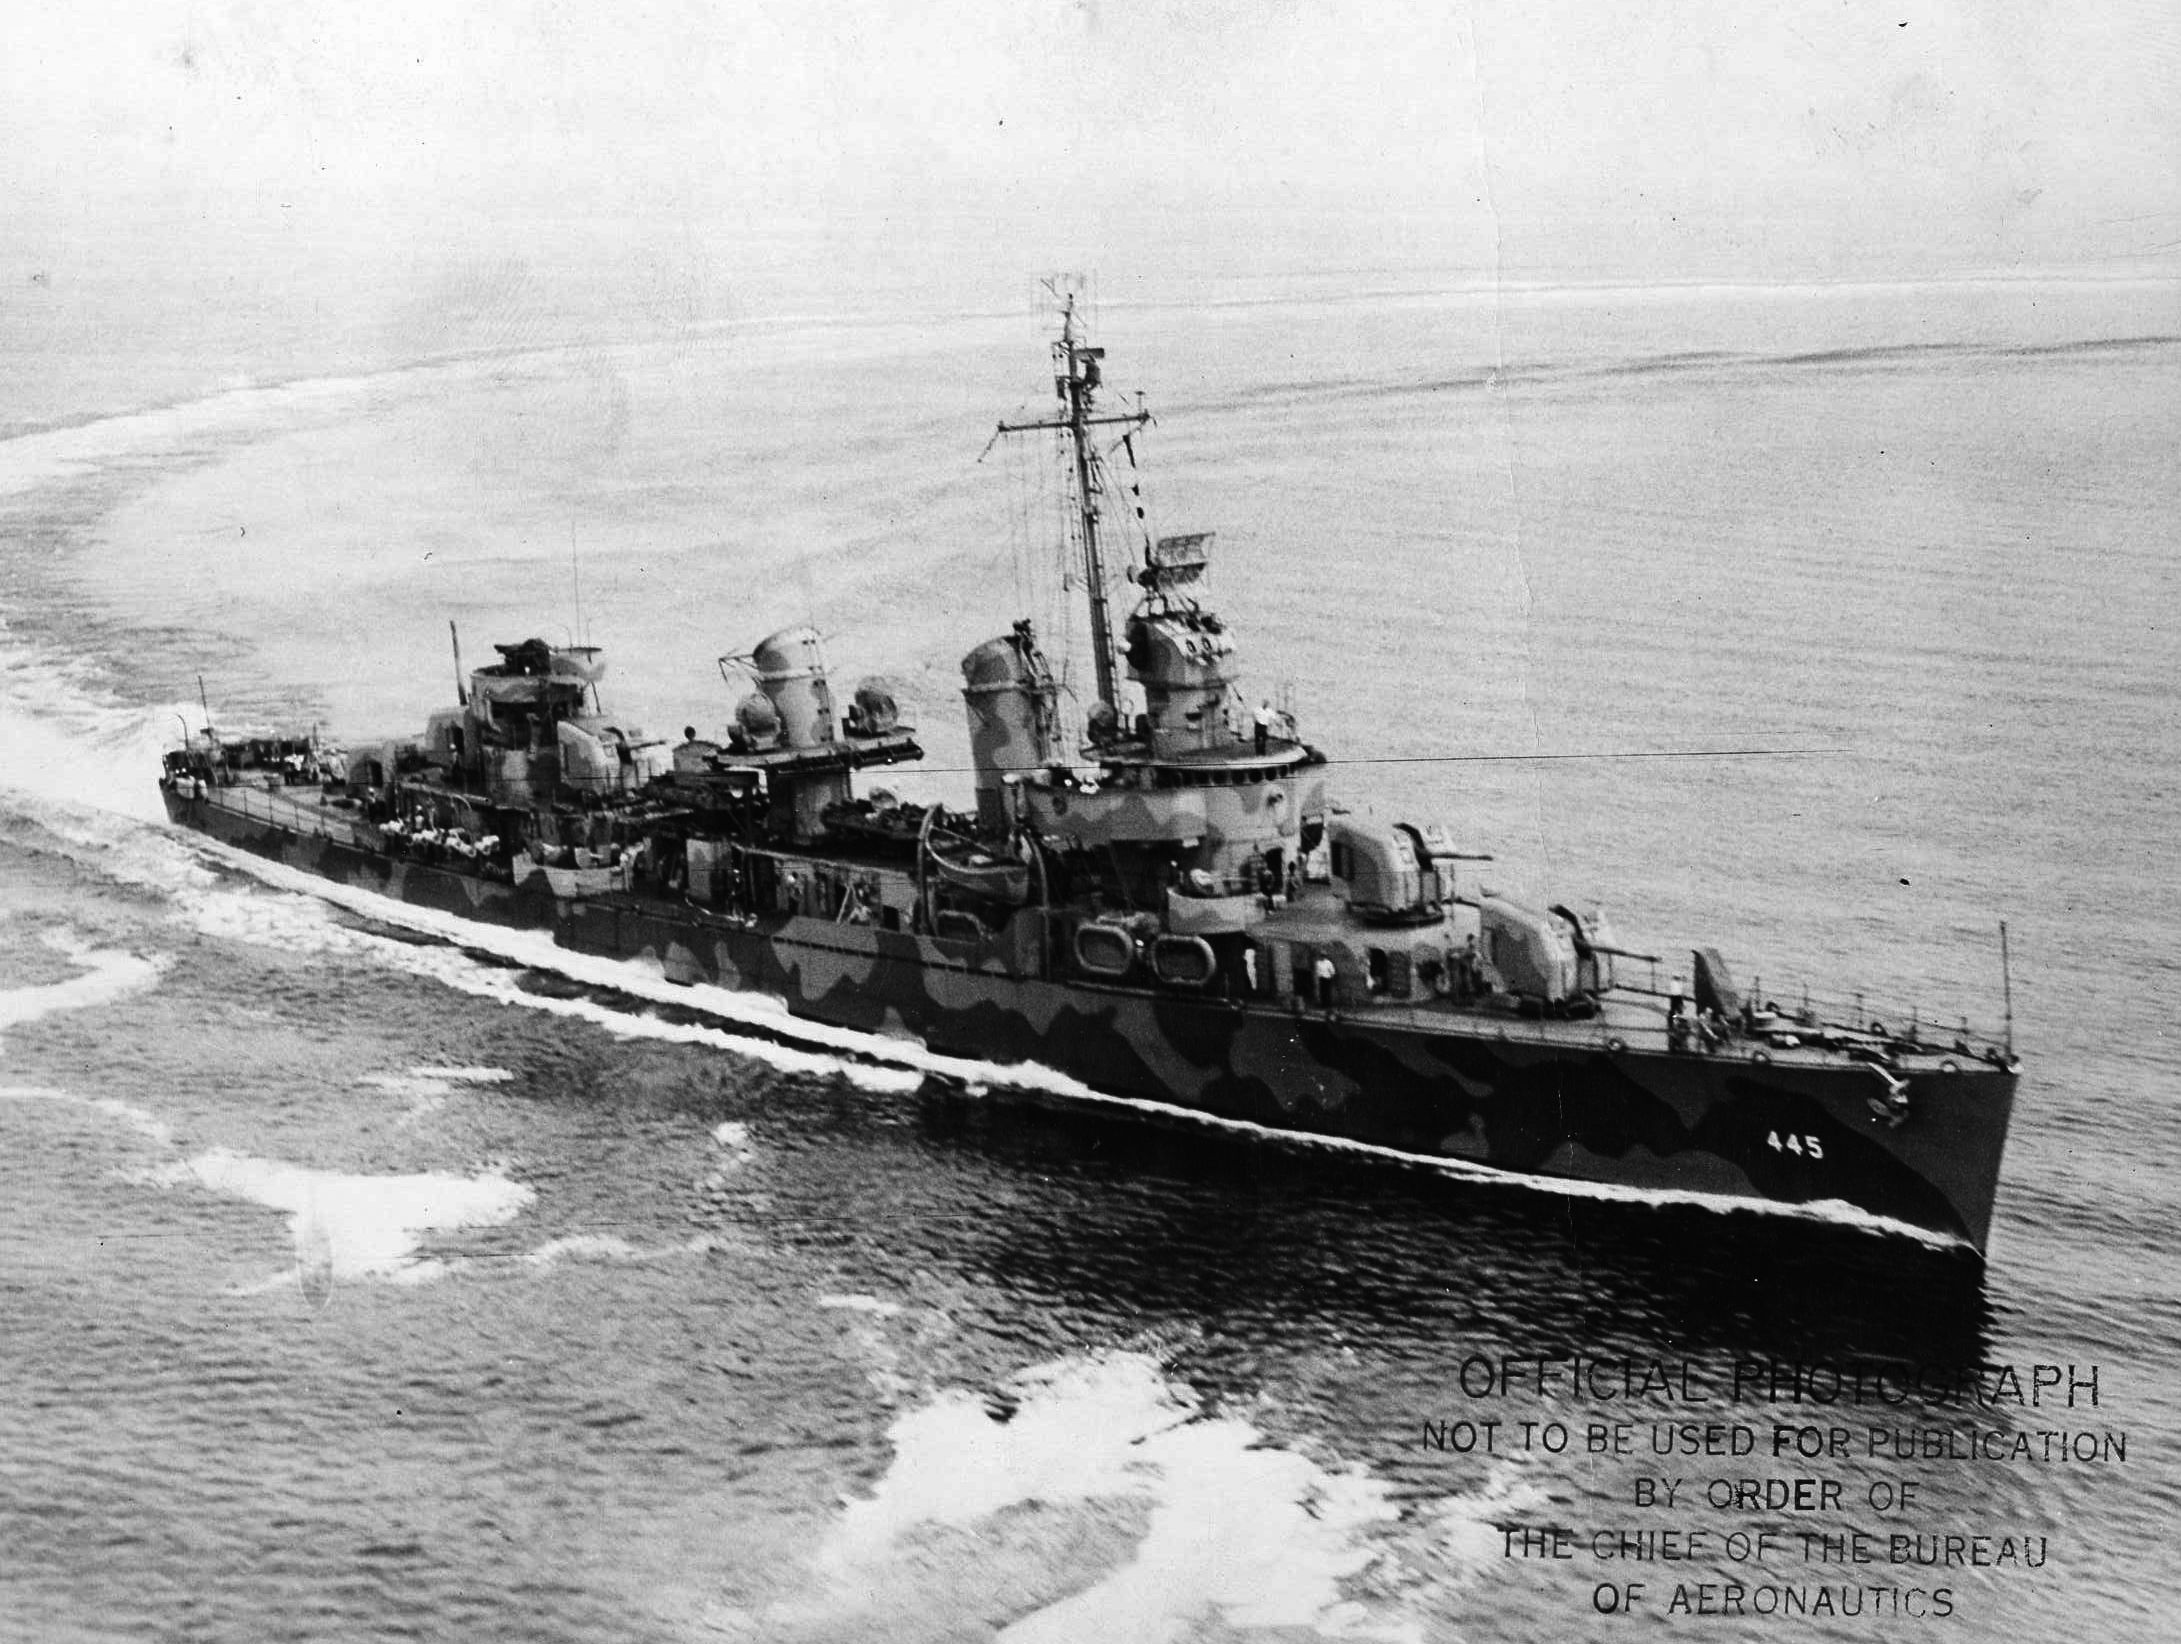 The destroyer USS Fletcher, namesake of a class of such warships serving with the U.S. Navy, is shown underway. The destroyers engaged during the naval battle off Guadalcanal on November 13, 1942, took heavy casualties.